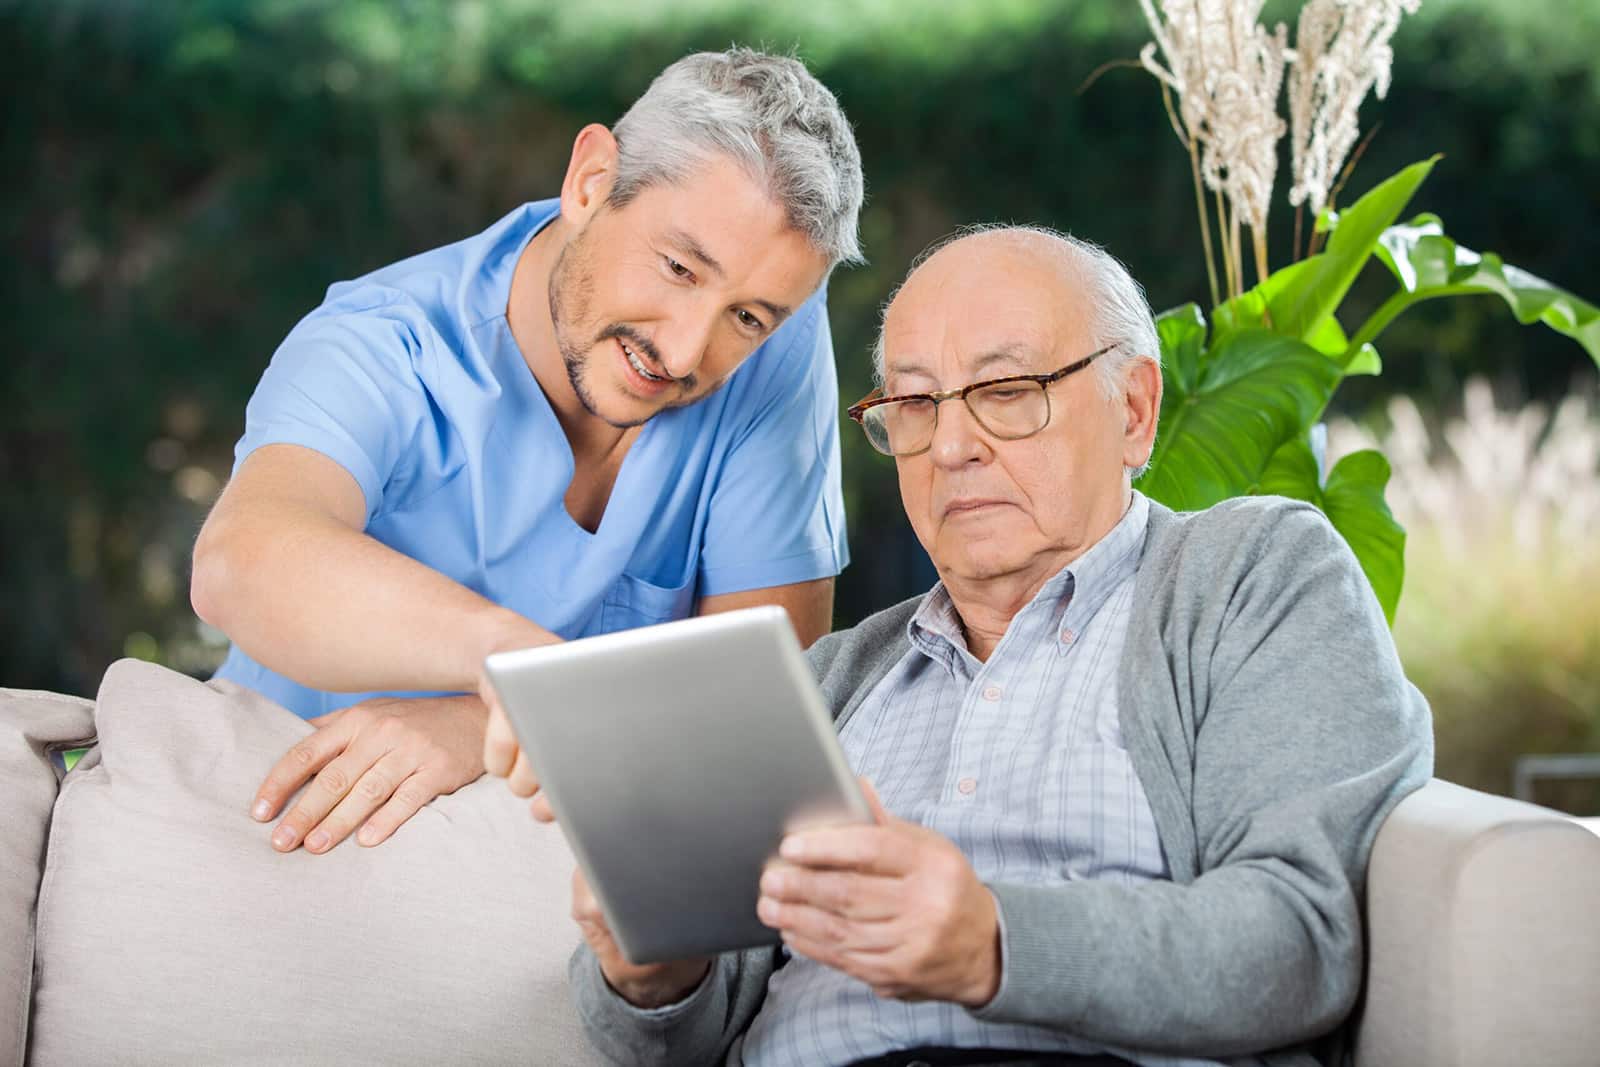 caregiver helping elderly man research walk-in tubs on his tablet